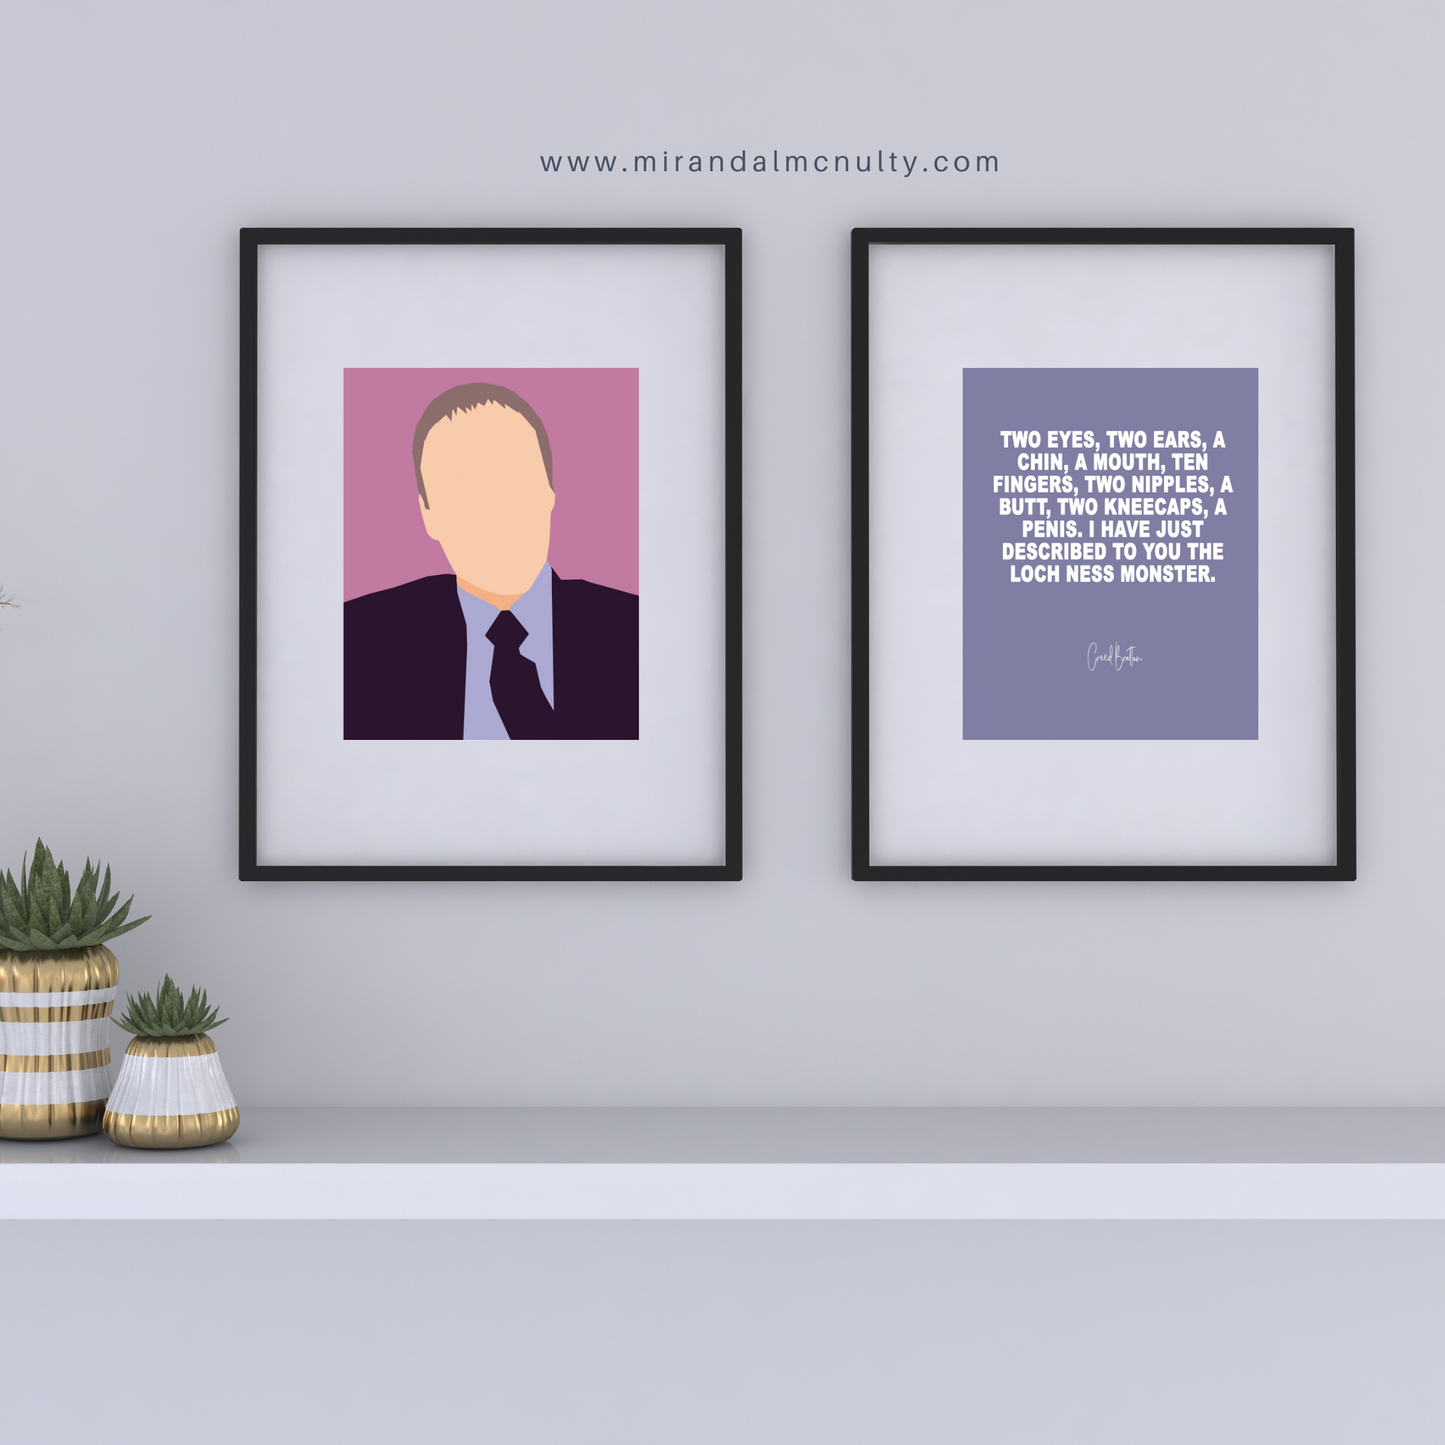 The Office Poster | Creed Bratton - Loch Ness Quote